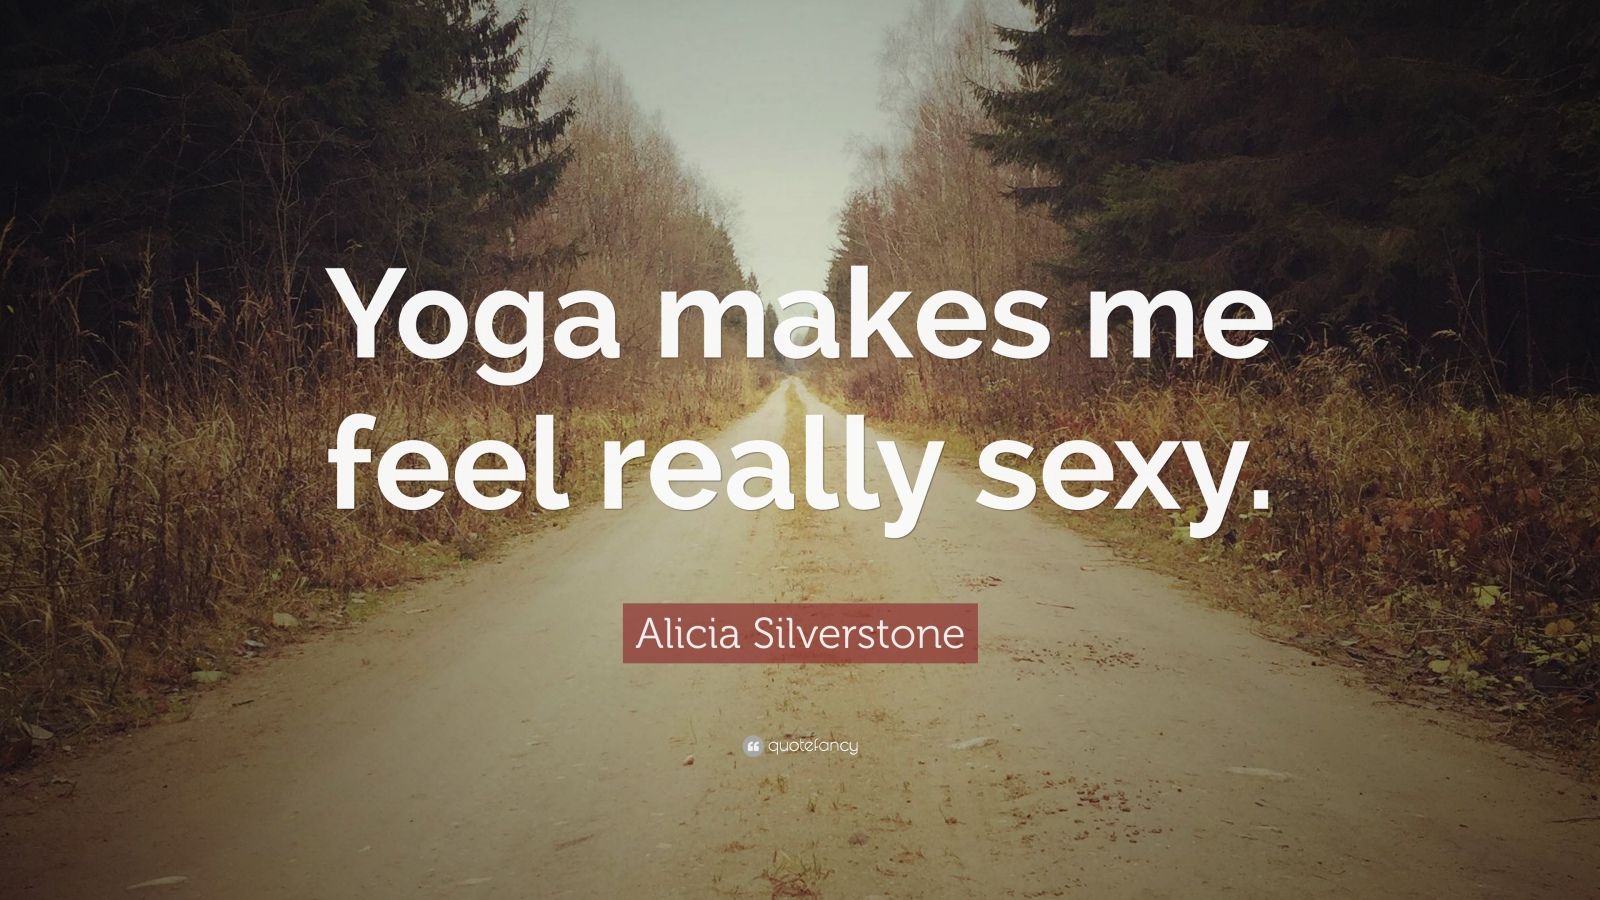 Alicia Silverstone Quote “yoga Makes Me Feel Really Sexy” 12 Wallpapers Quotefancy